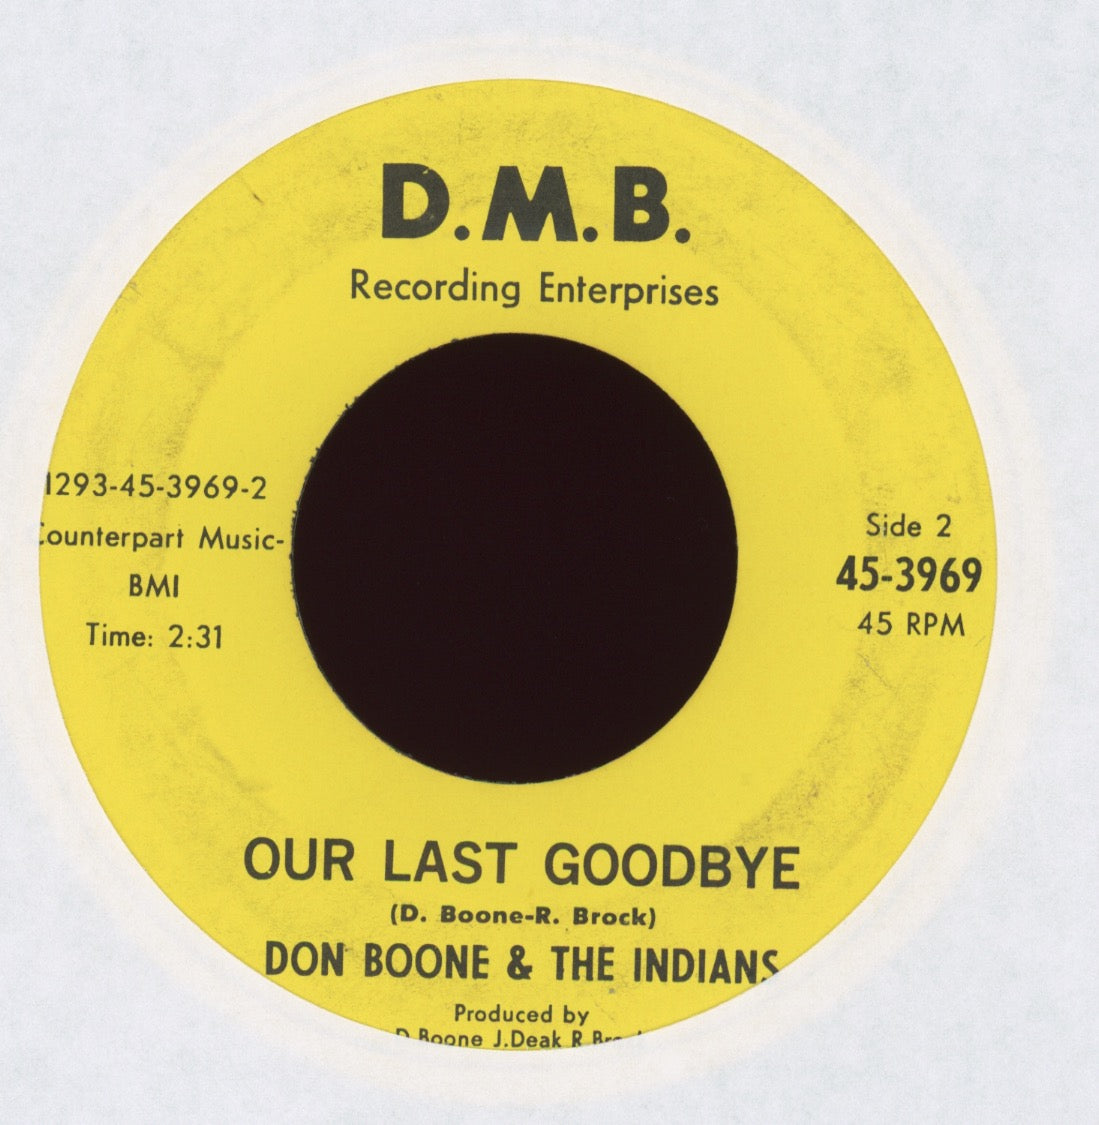 Don Boone & The Indians - Pitty-Pat on D.M.B.